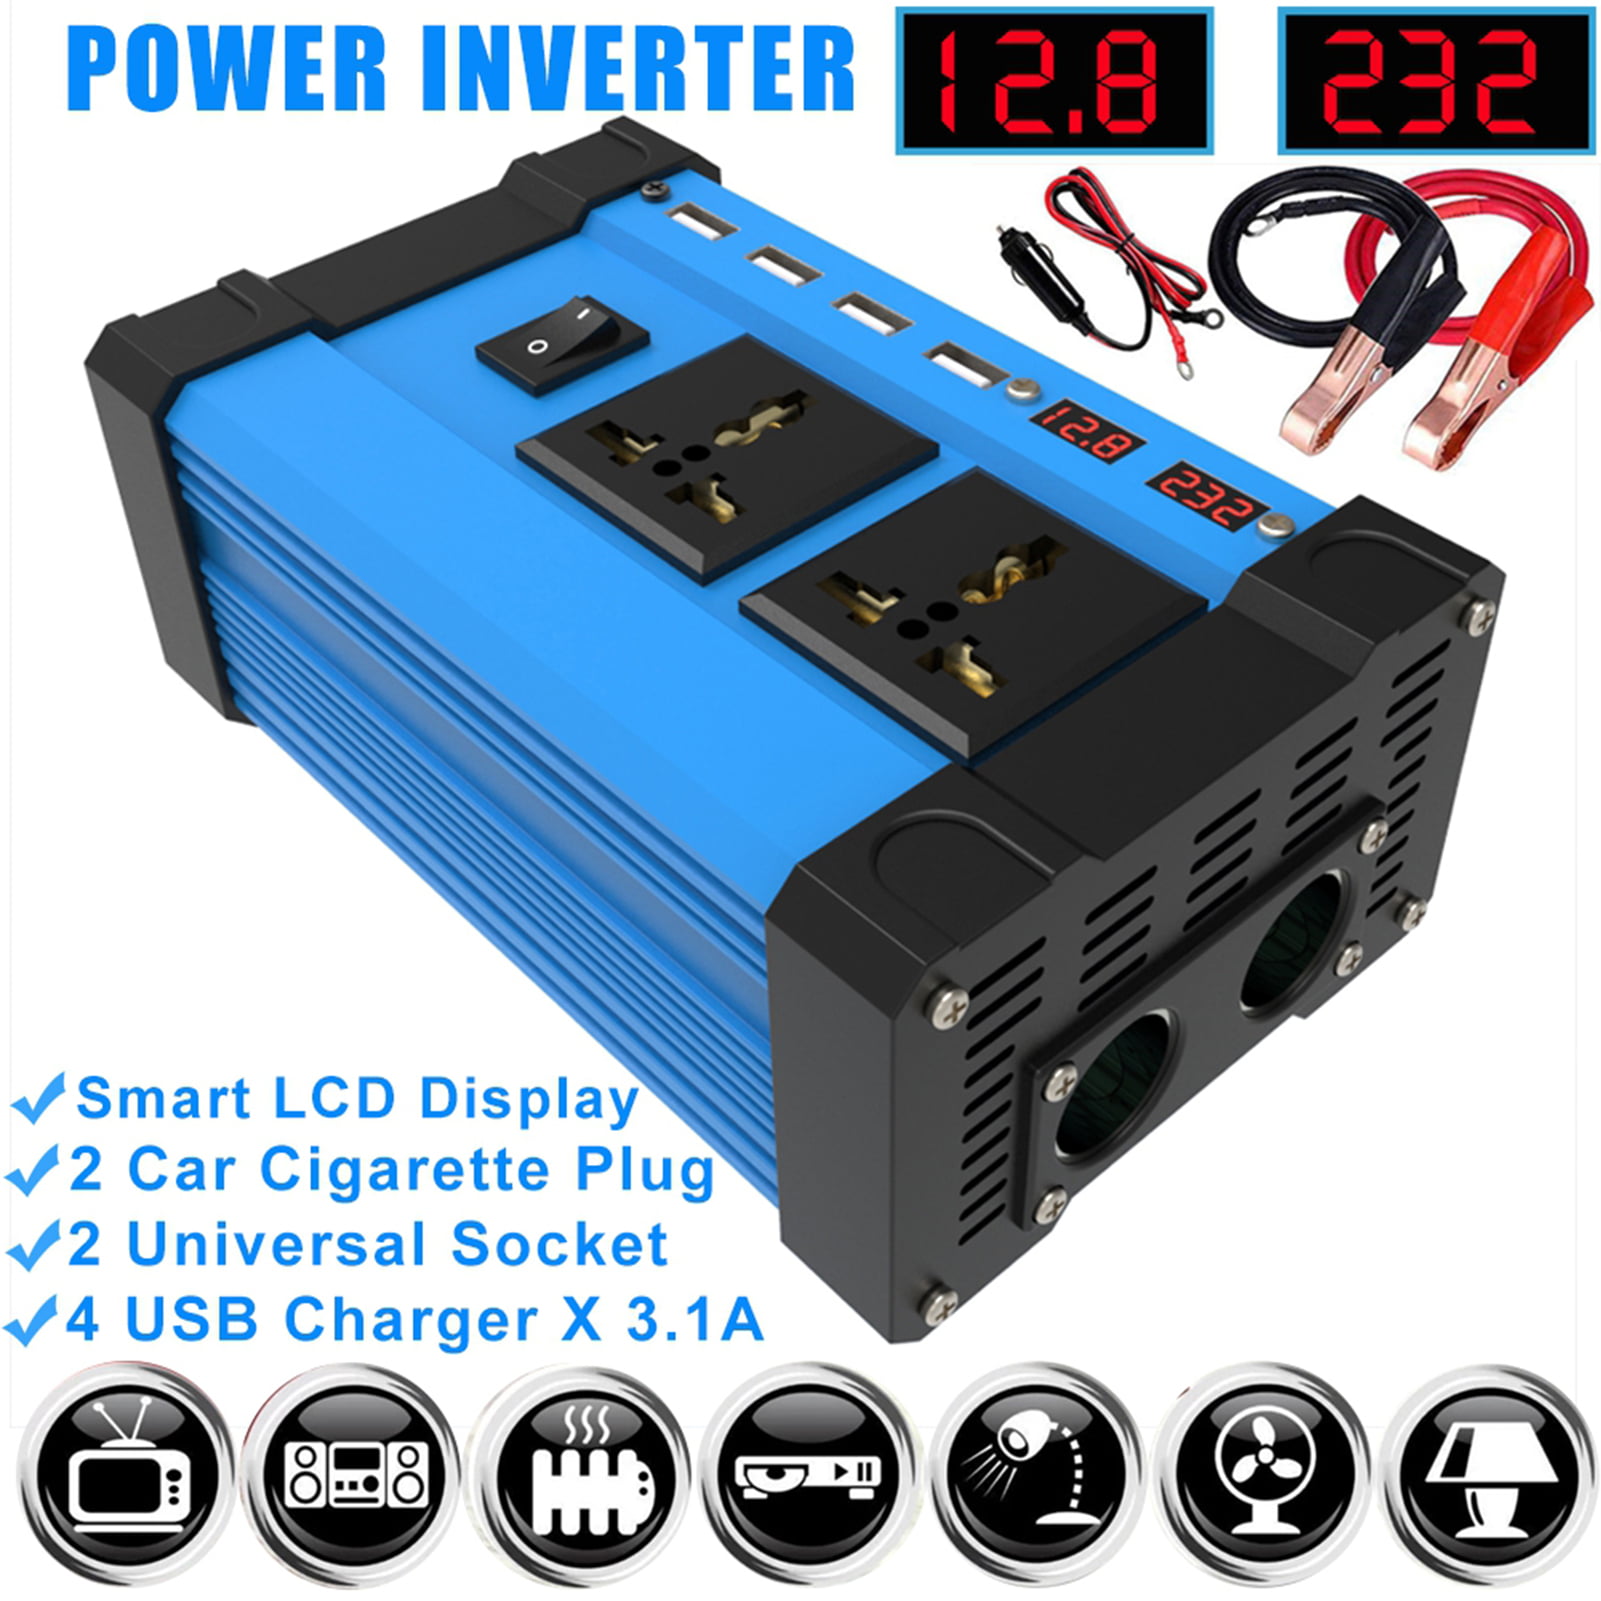 New Auto Car Power Inverter 600W-3500W DC 12V to AC 110/220V Charger Converter 